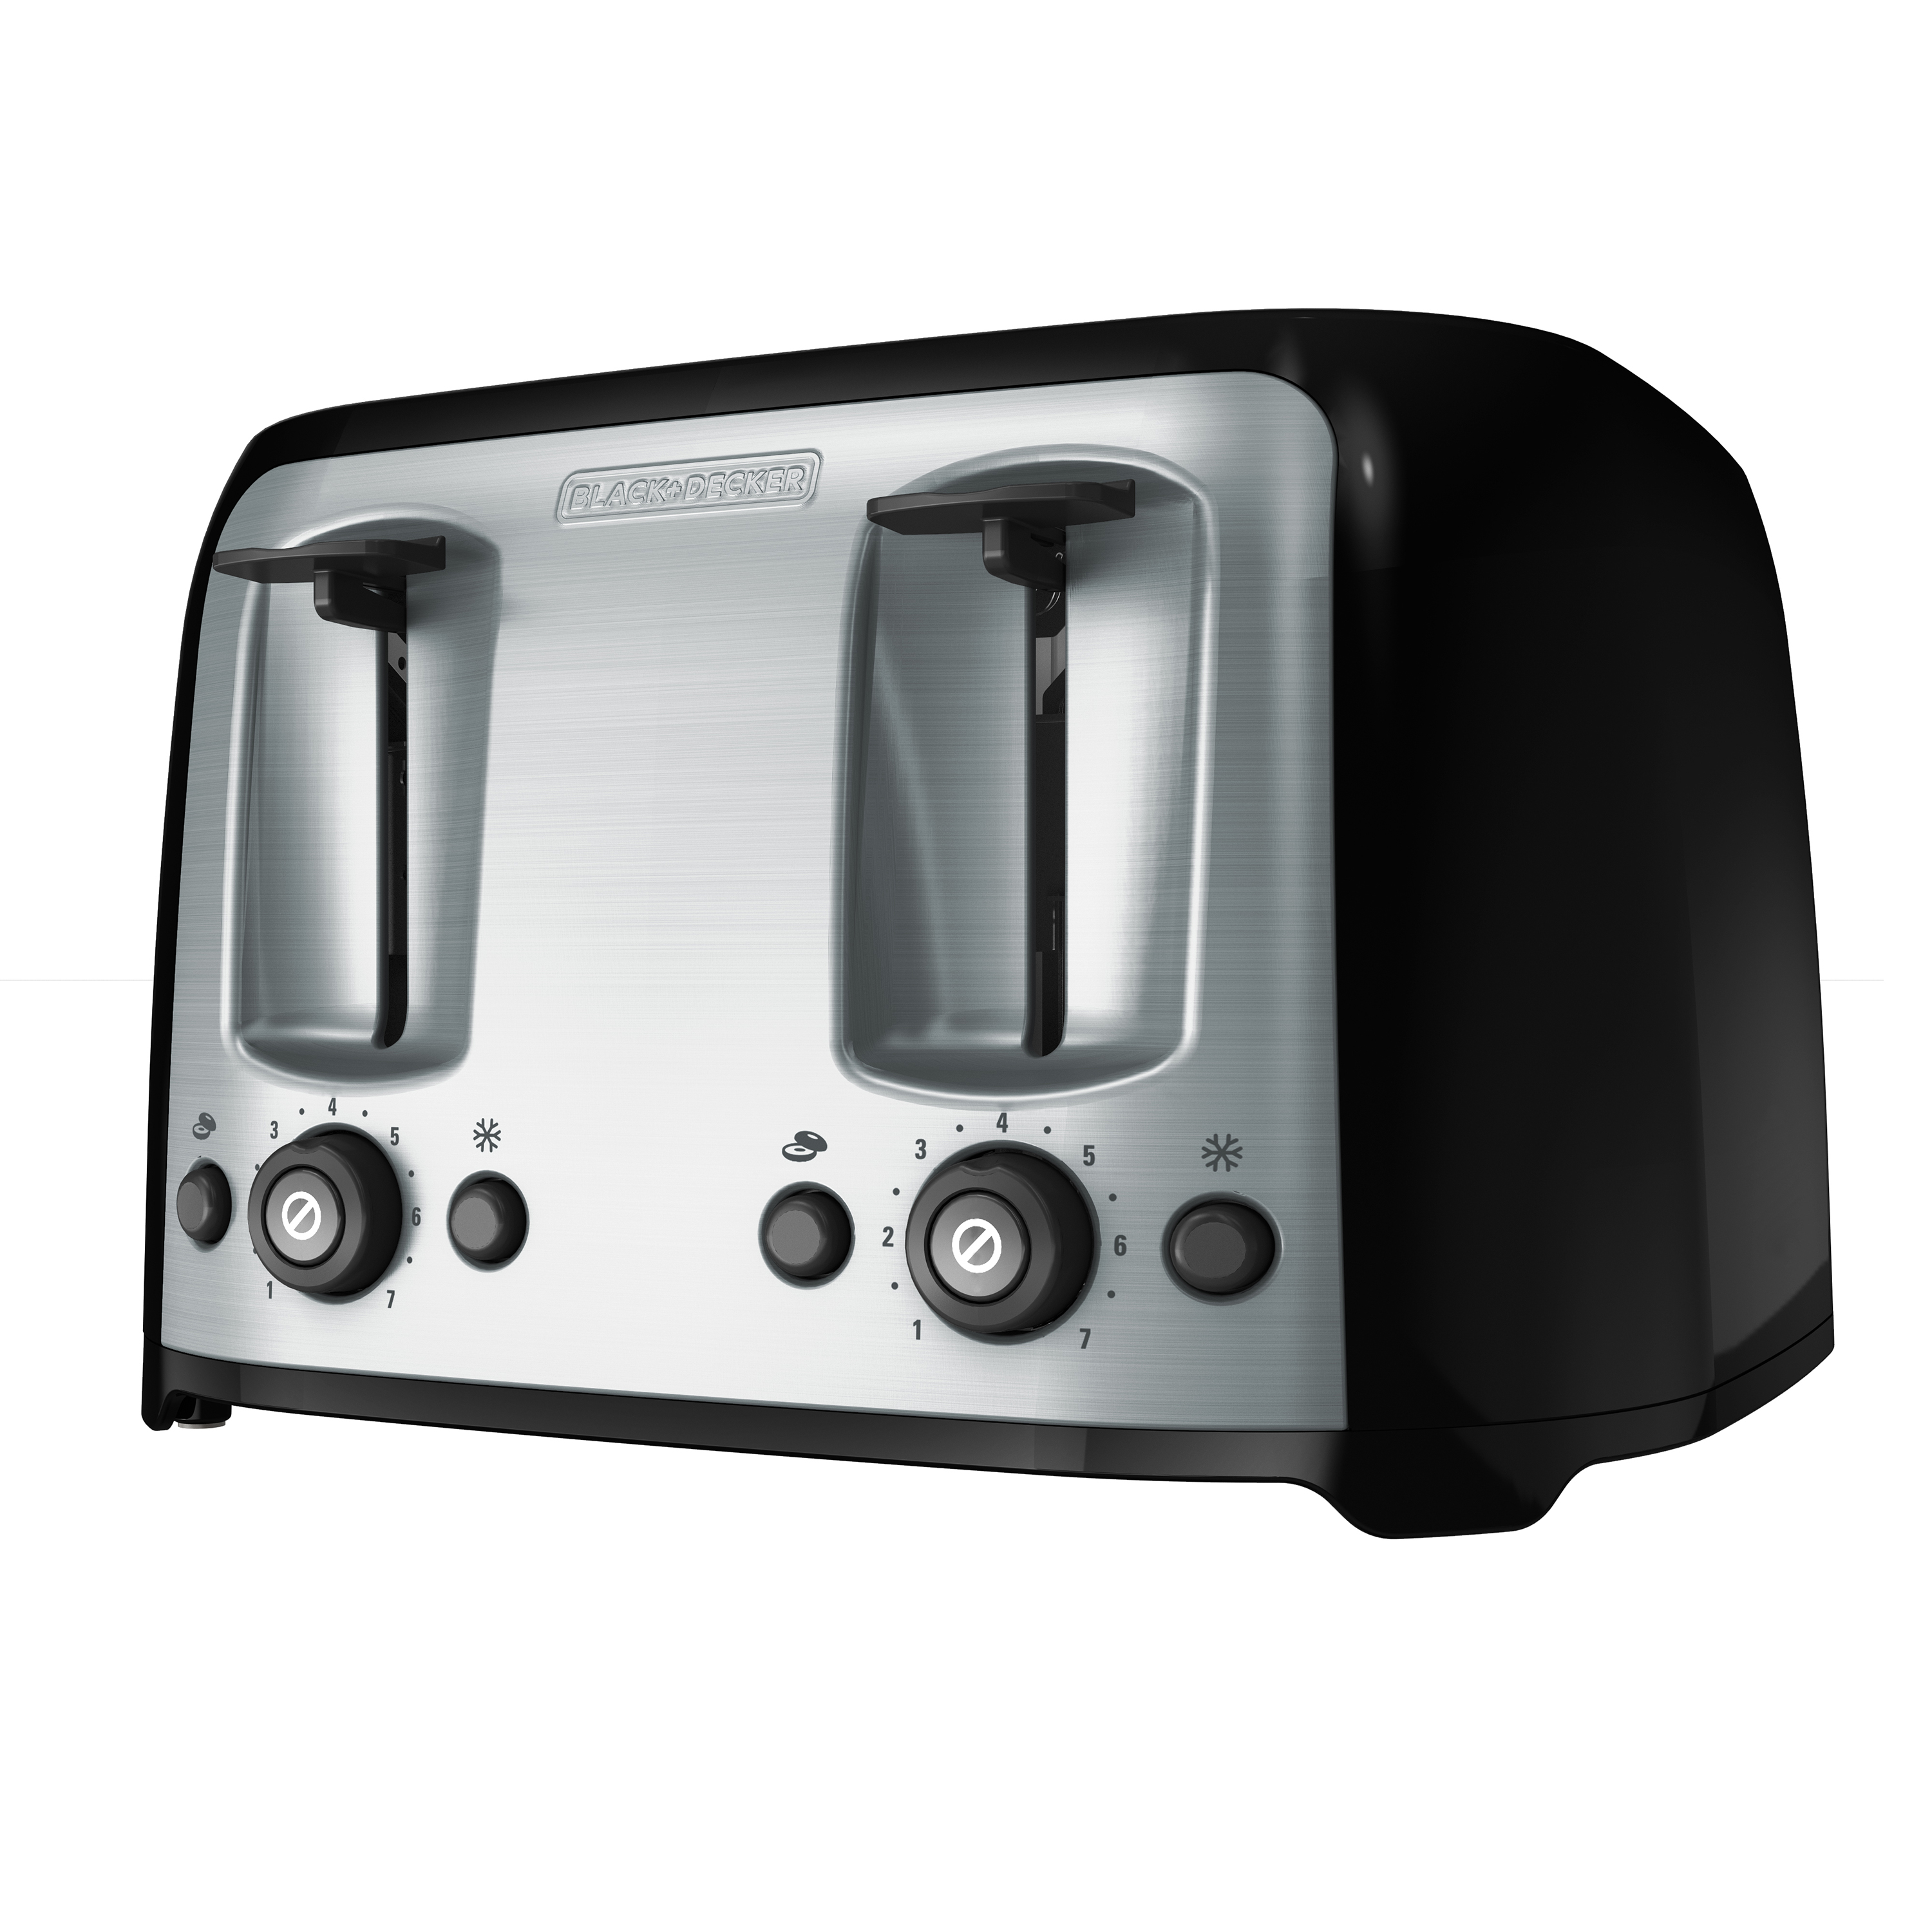 BLACK+DECKER 4-Slice Toaster with Extra-Wide Slots, Black/Silver, TR1478BD - image 1 of 10